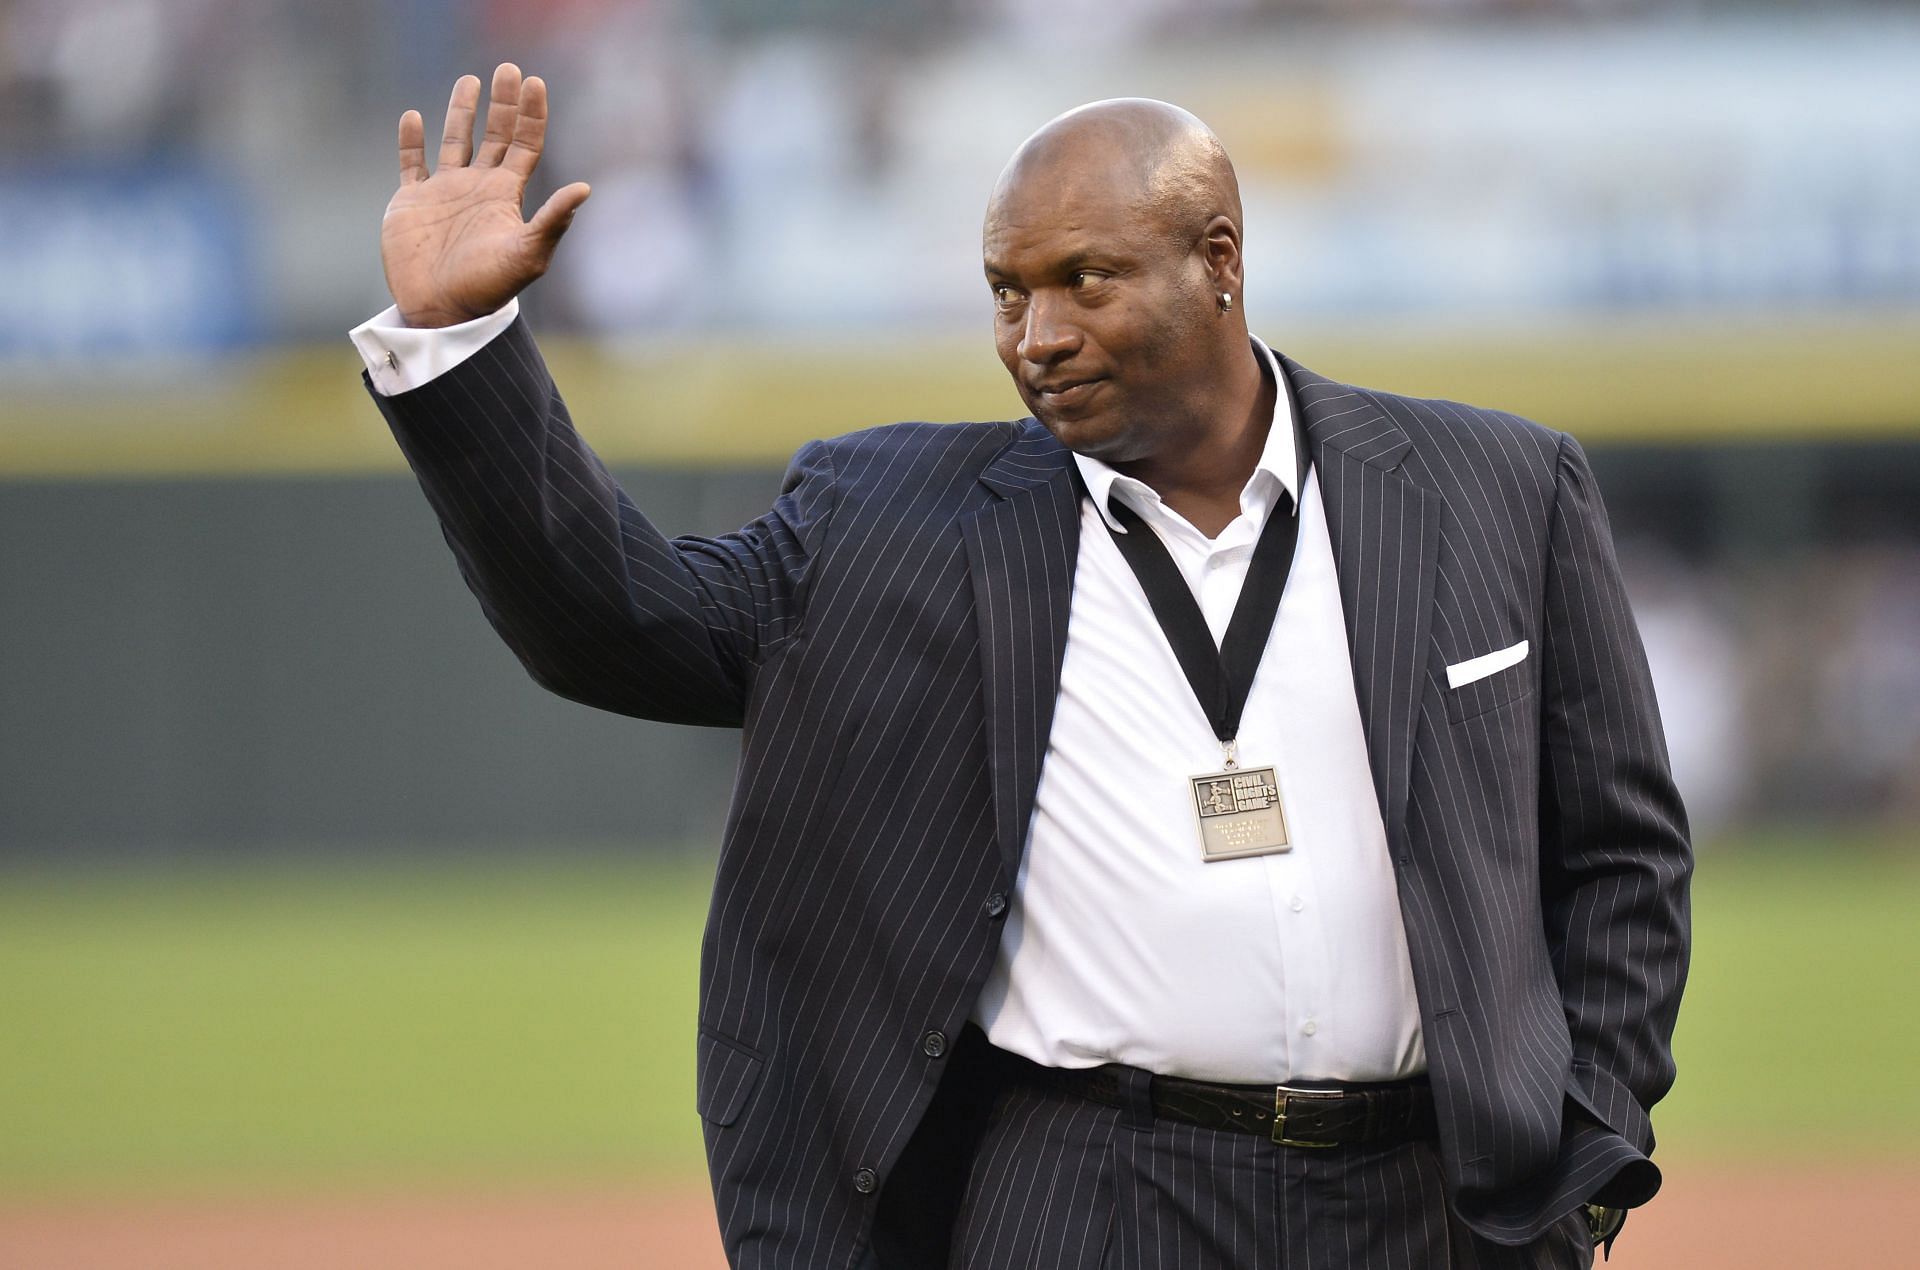 Former Chicago White Sox and Kansas City Royals player and Heisman Trophy winner Bo Jackson